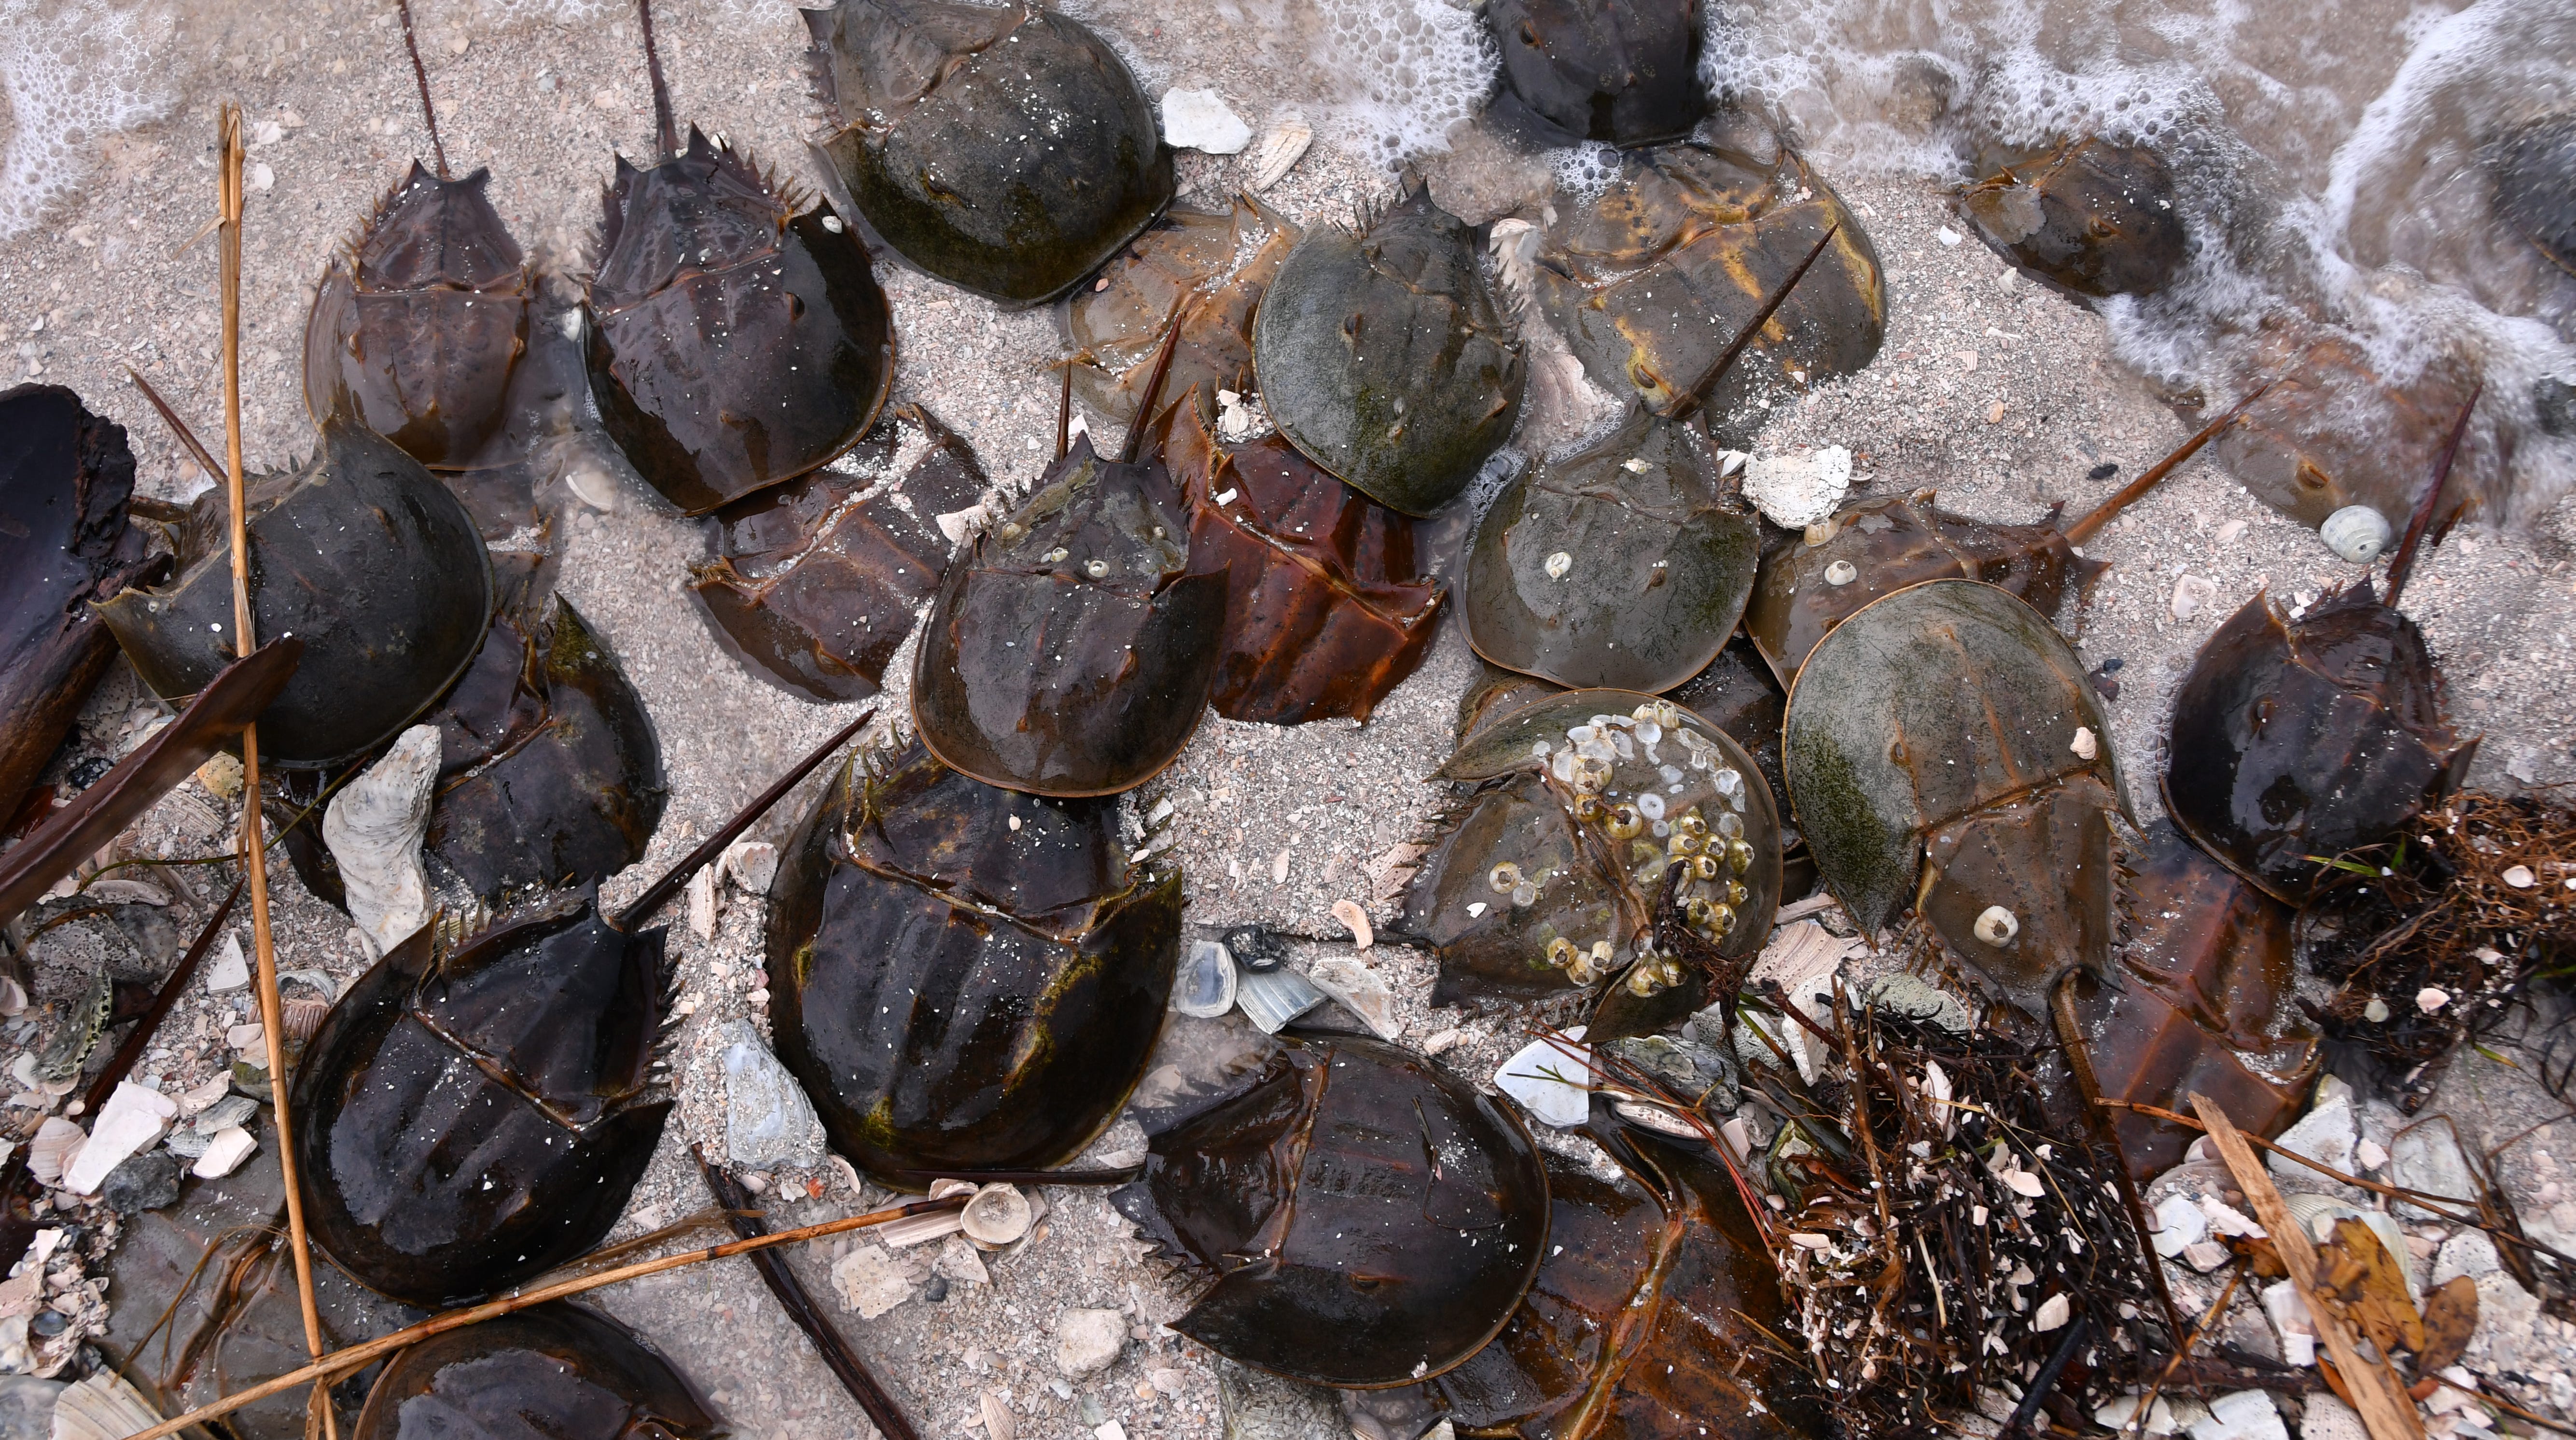 Horseshoe crabs mate year-round, but more frequently in March and April, and right now thousands are mating on the south side of the Titusville Causeway east of the Max Brewer Bridge. On Monday and Tuesday, citizen scientists for the FWC Laurilee Thompson and Bill Klein were were logging and tagging horseshoe crabs on the north side of the causeway. They counted 5,000 crabs on the south side of the causeway.